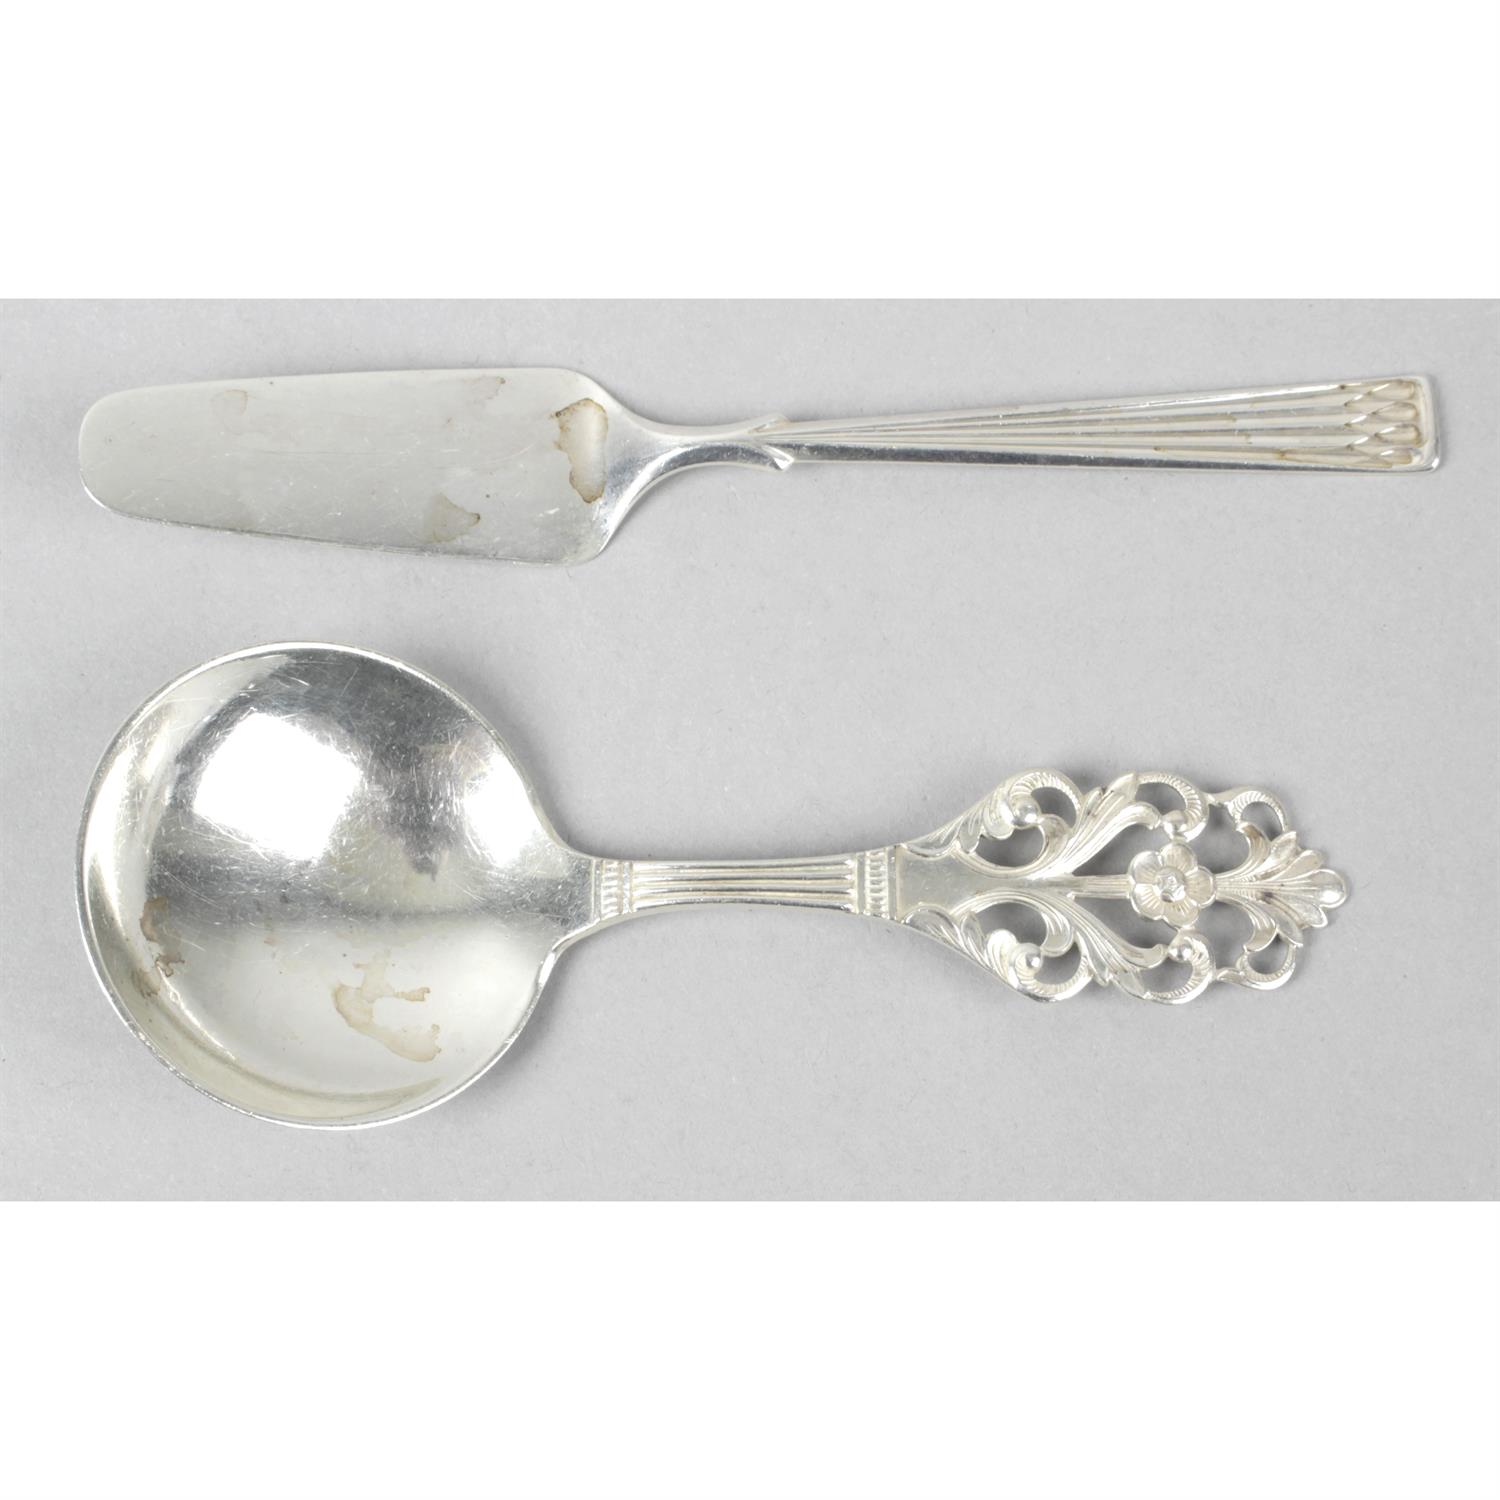 A miscellaneous selection of small spoons, plus a butter knife, tea strainer and four assorted - Image 2 of 5